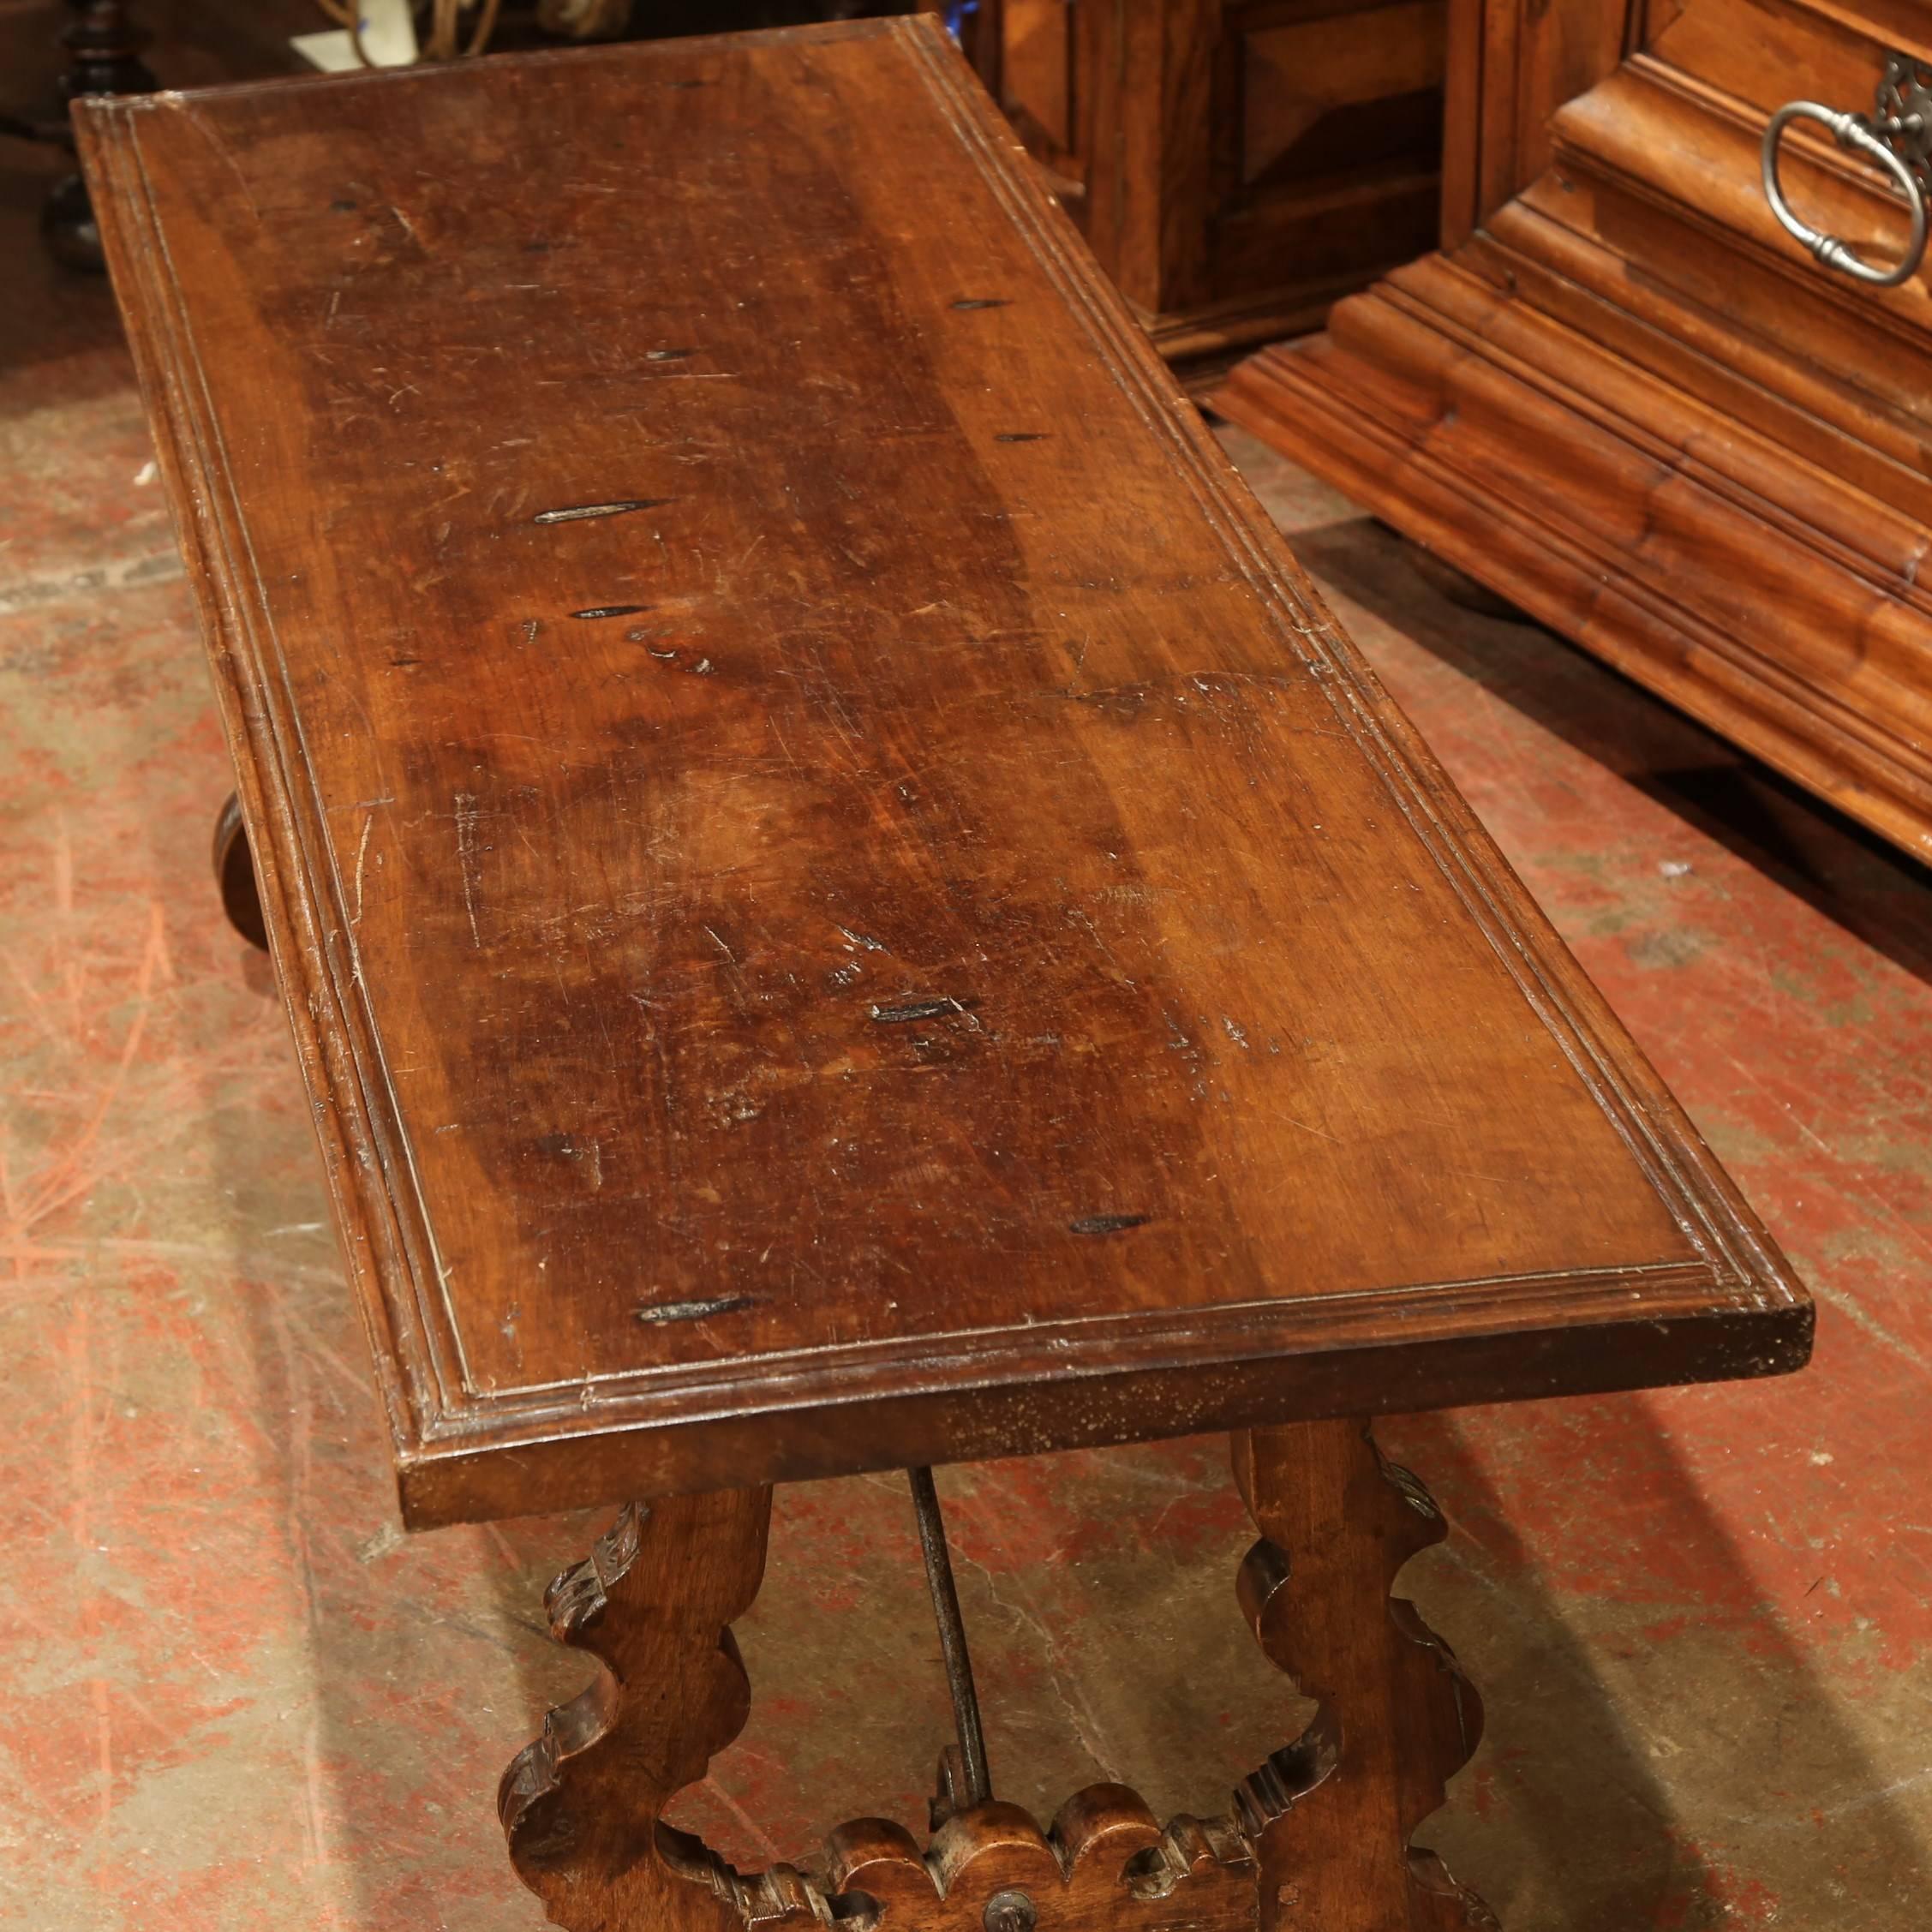 Complete your living room with this Classic, antique fruitwood coffee table from Spain, circa 1820. The table is supported by two carved legs, which are joined together with wrought iron stretchers. The tabletop is one piece of wood that has aged